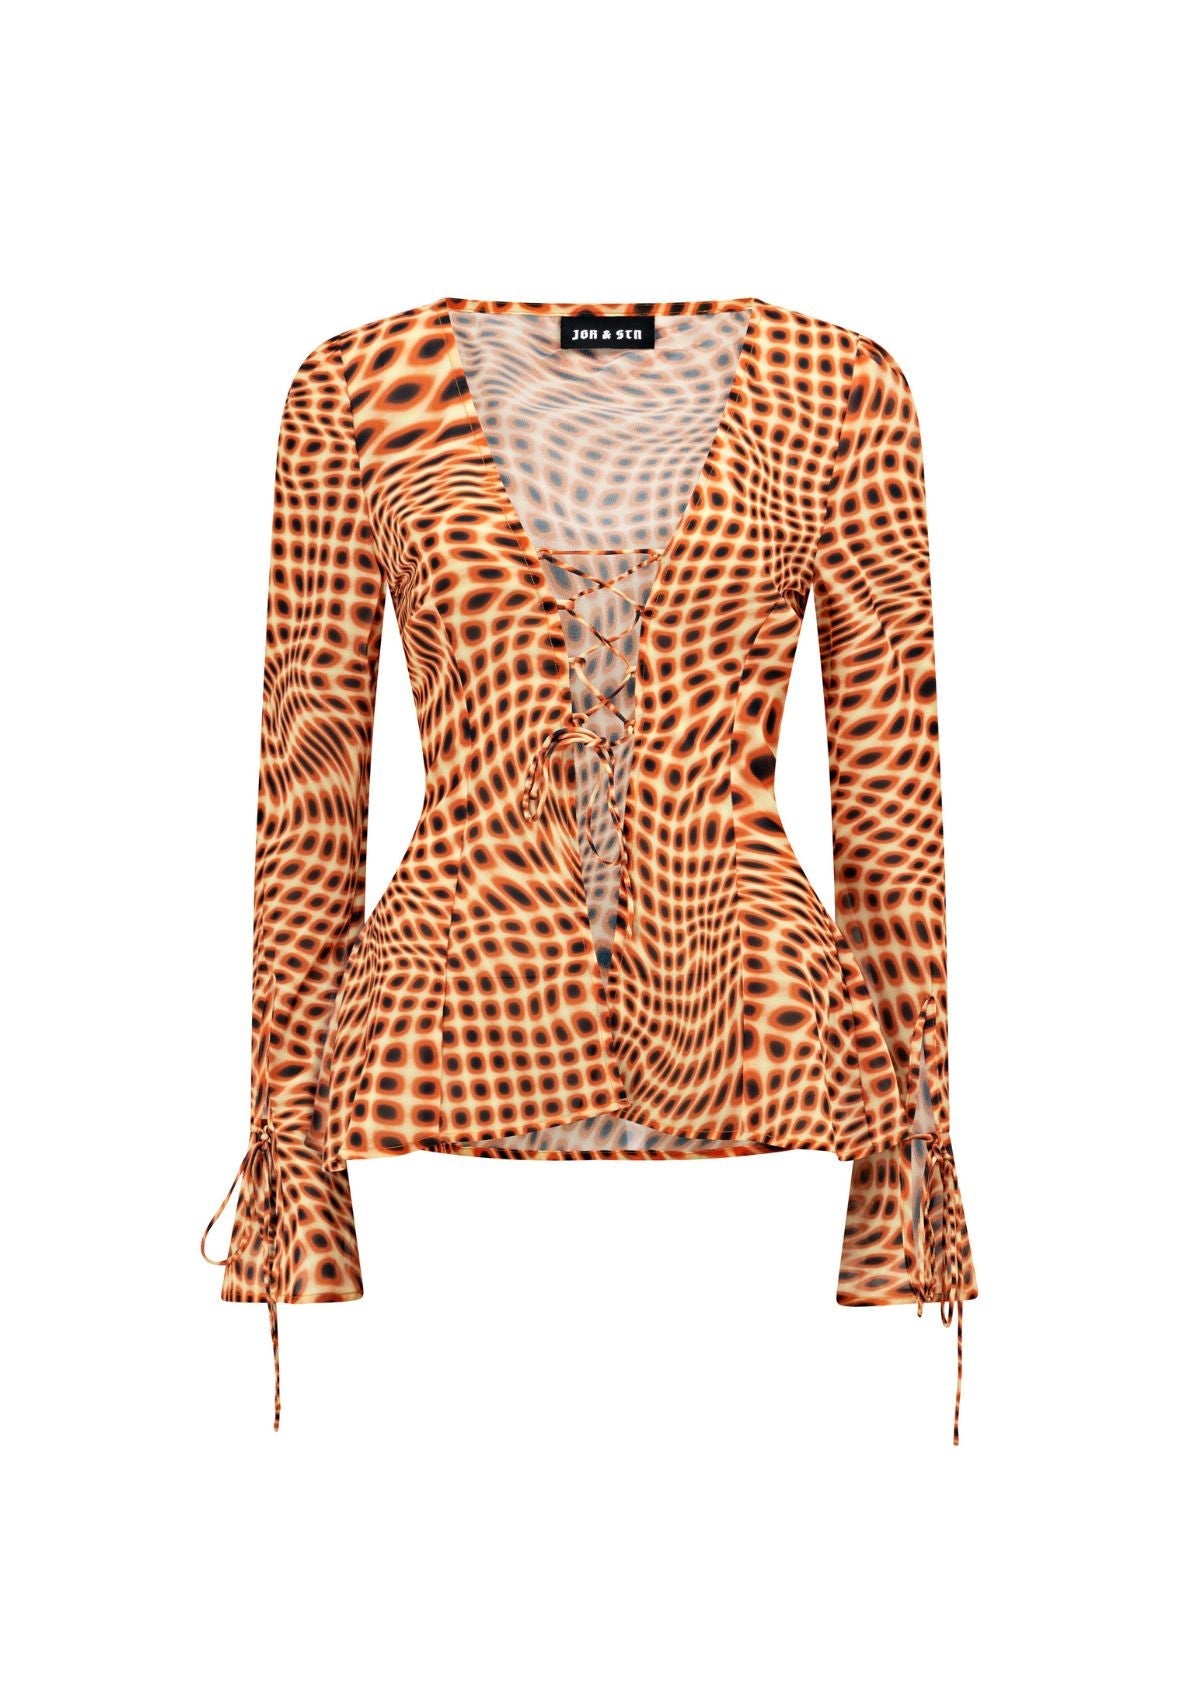 The Amber Blouse